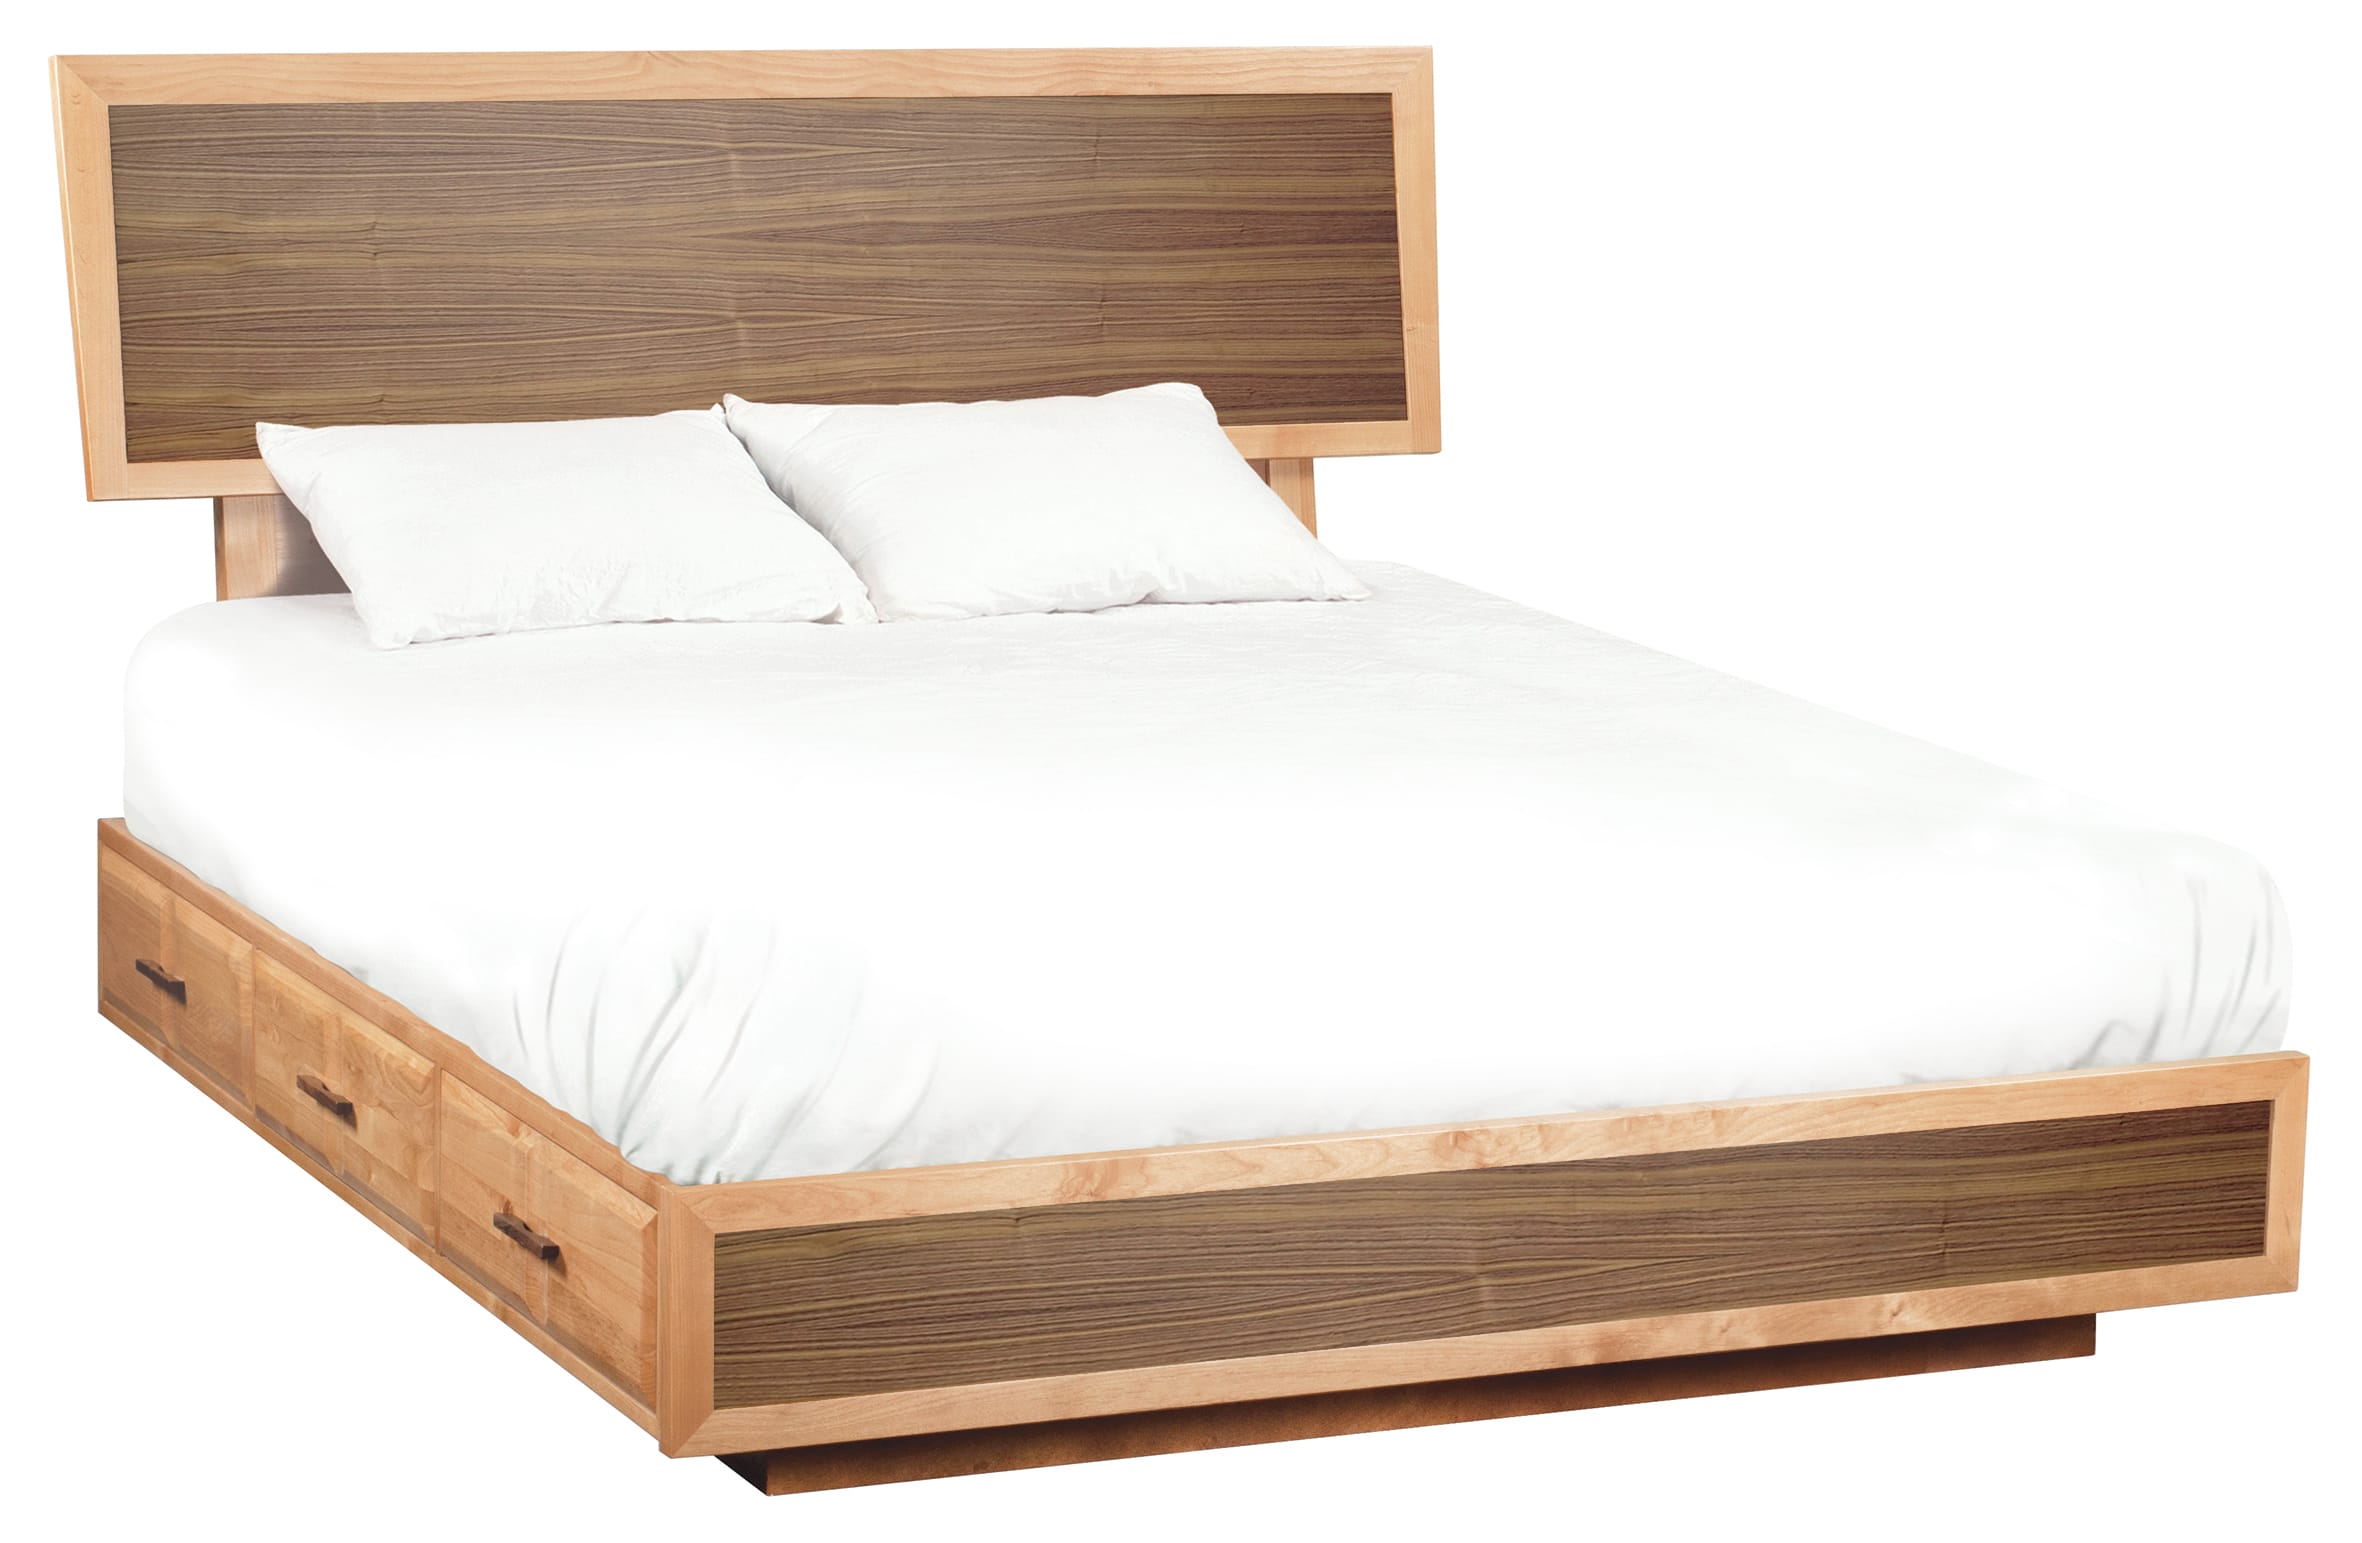 Addison King Adjustable Storage Bed, Duet by Wittier Wood Furniture